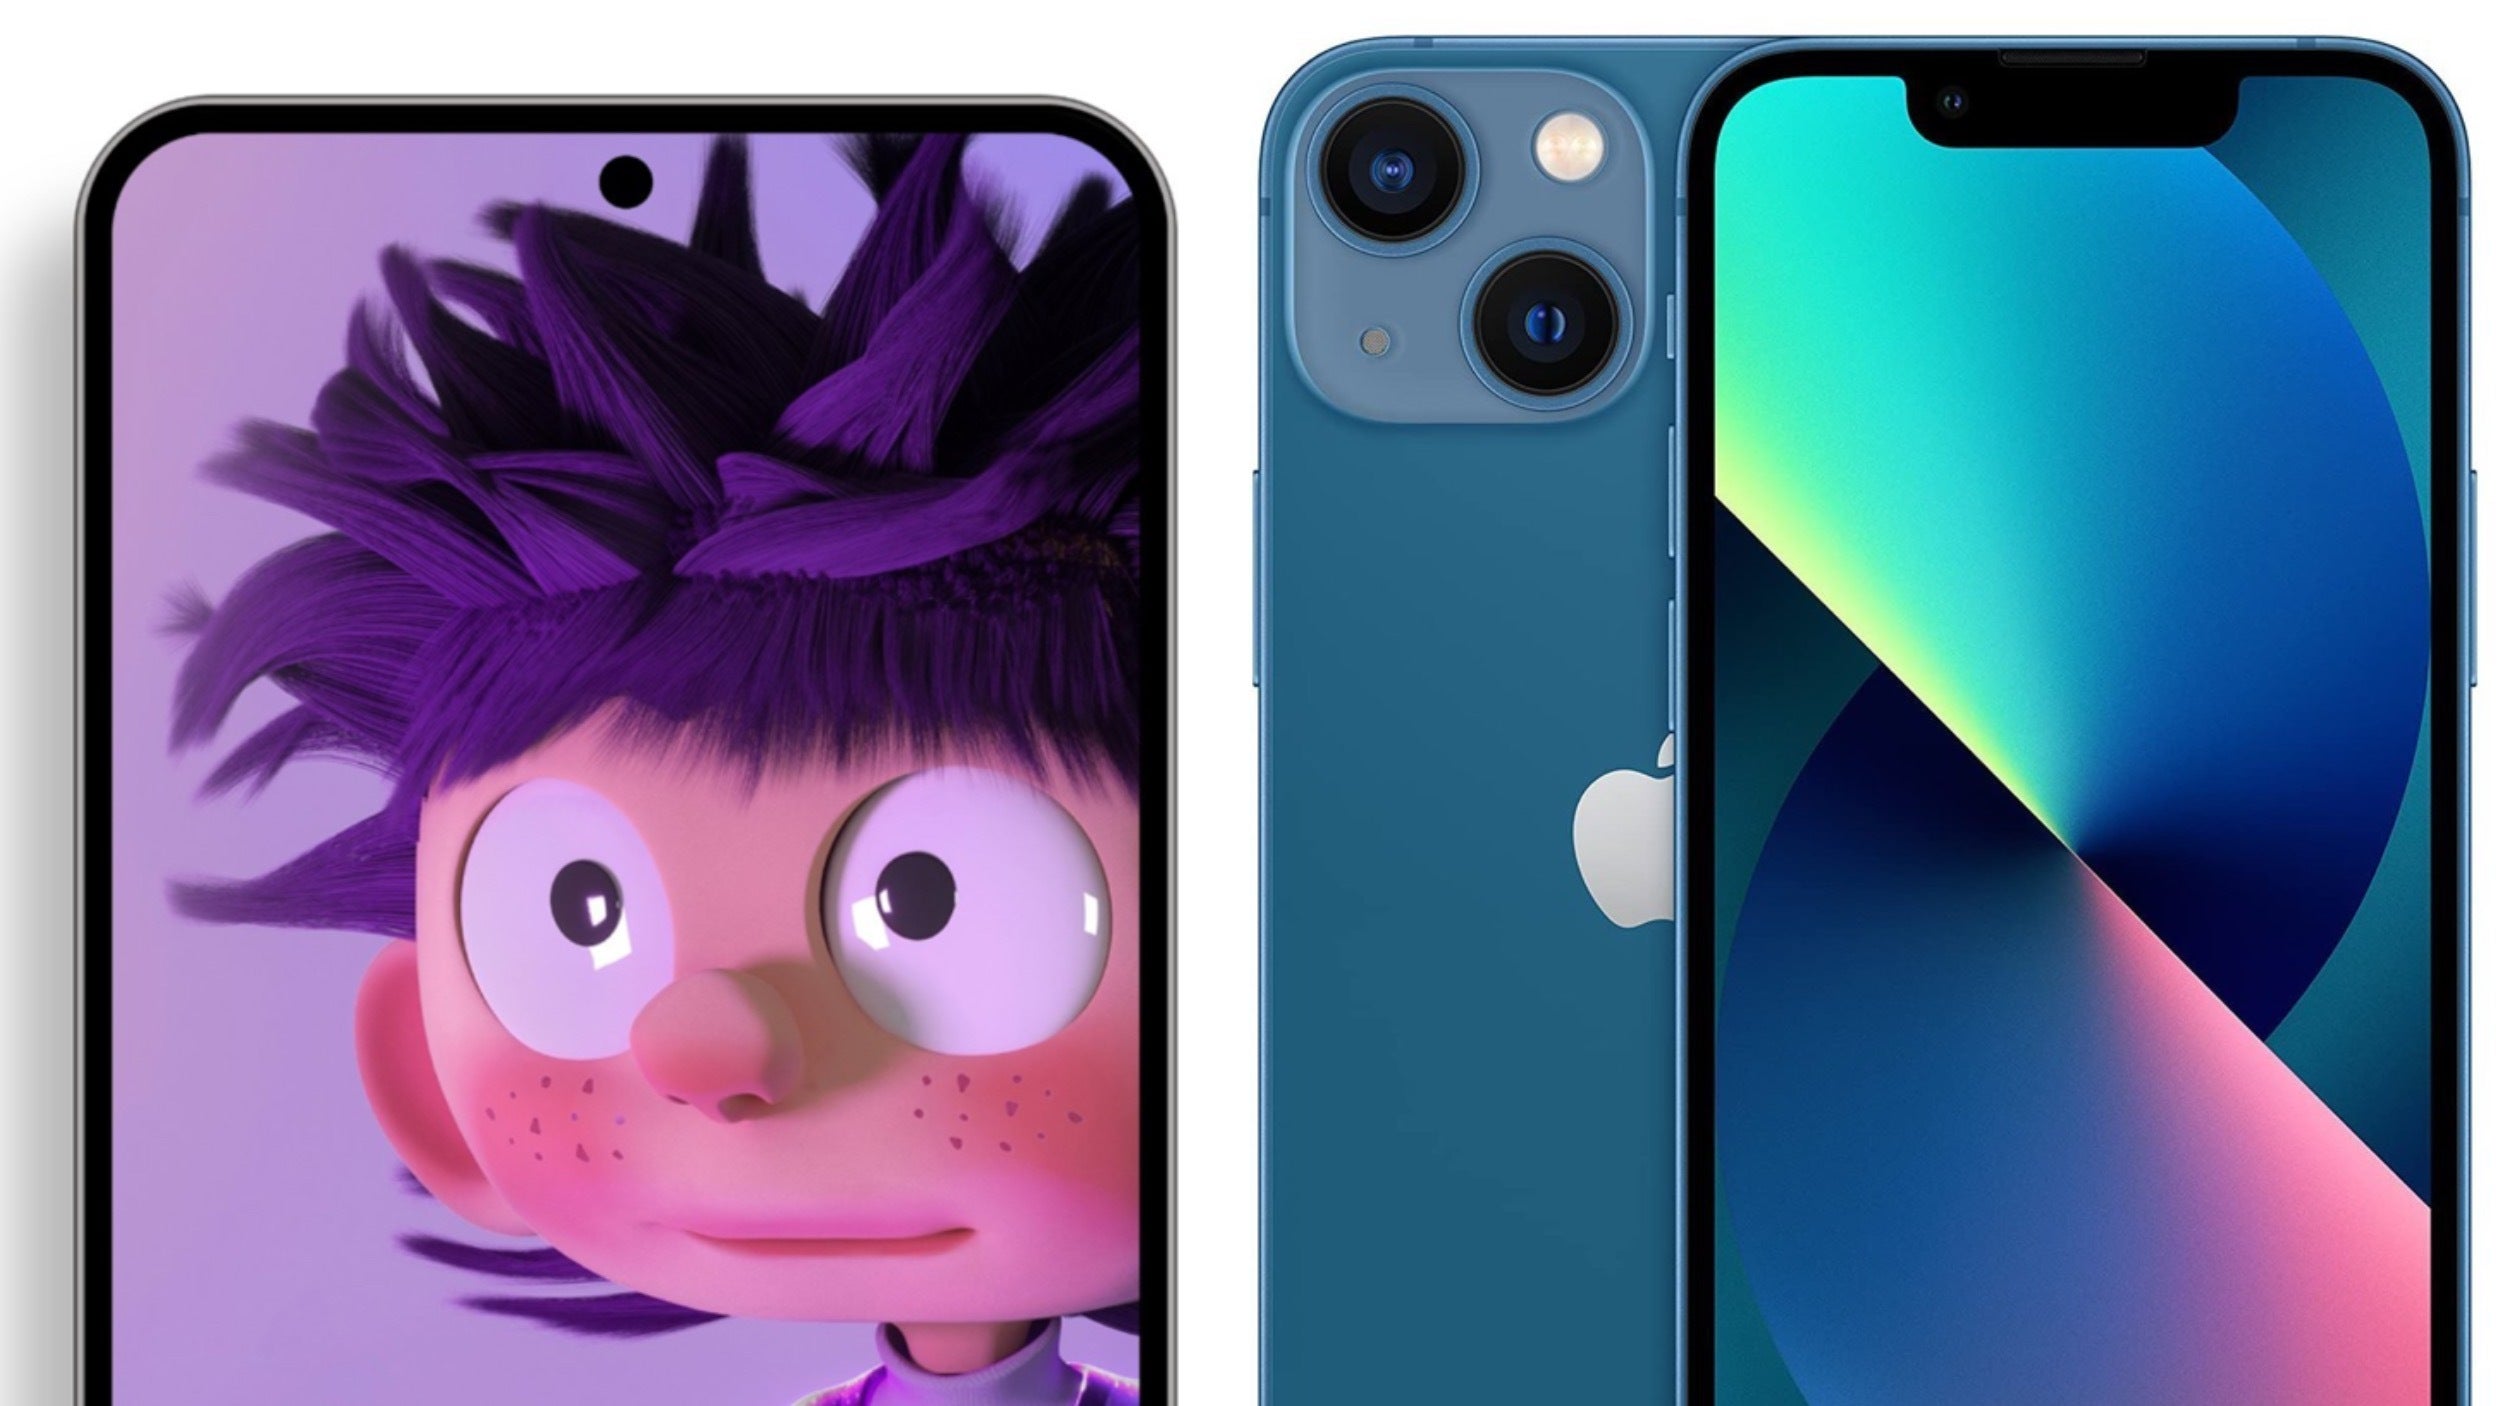 Galaxy S22: Is Samsung's iPhone x Google Pixel Frankenstein bringing the best of Apple and Android?